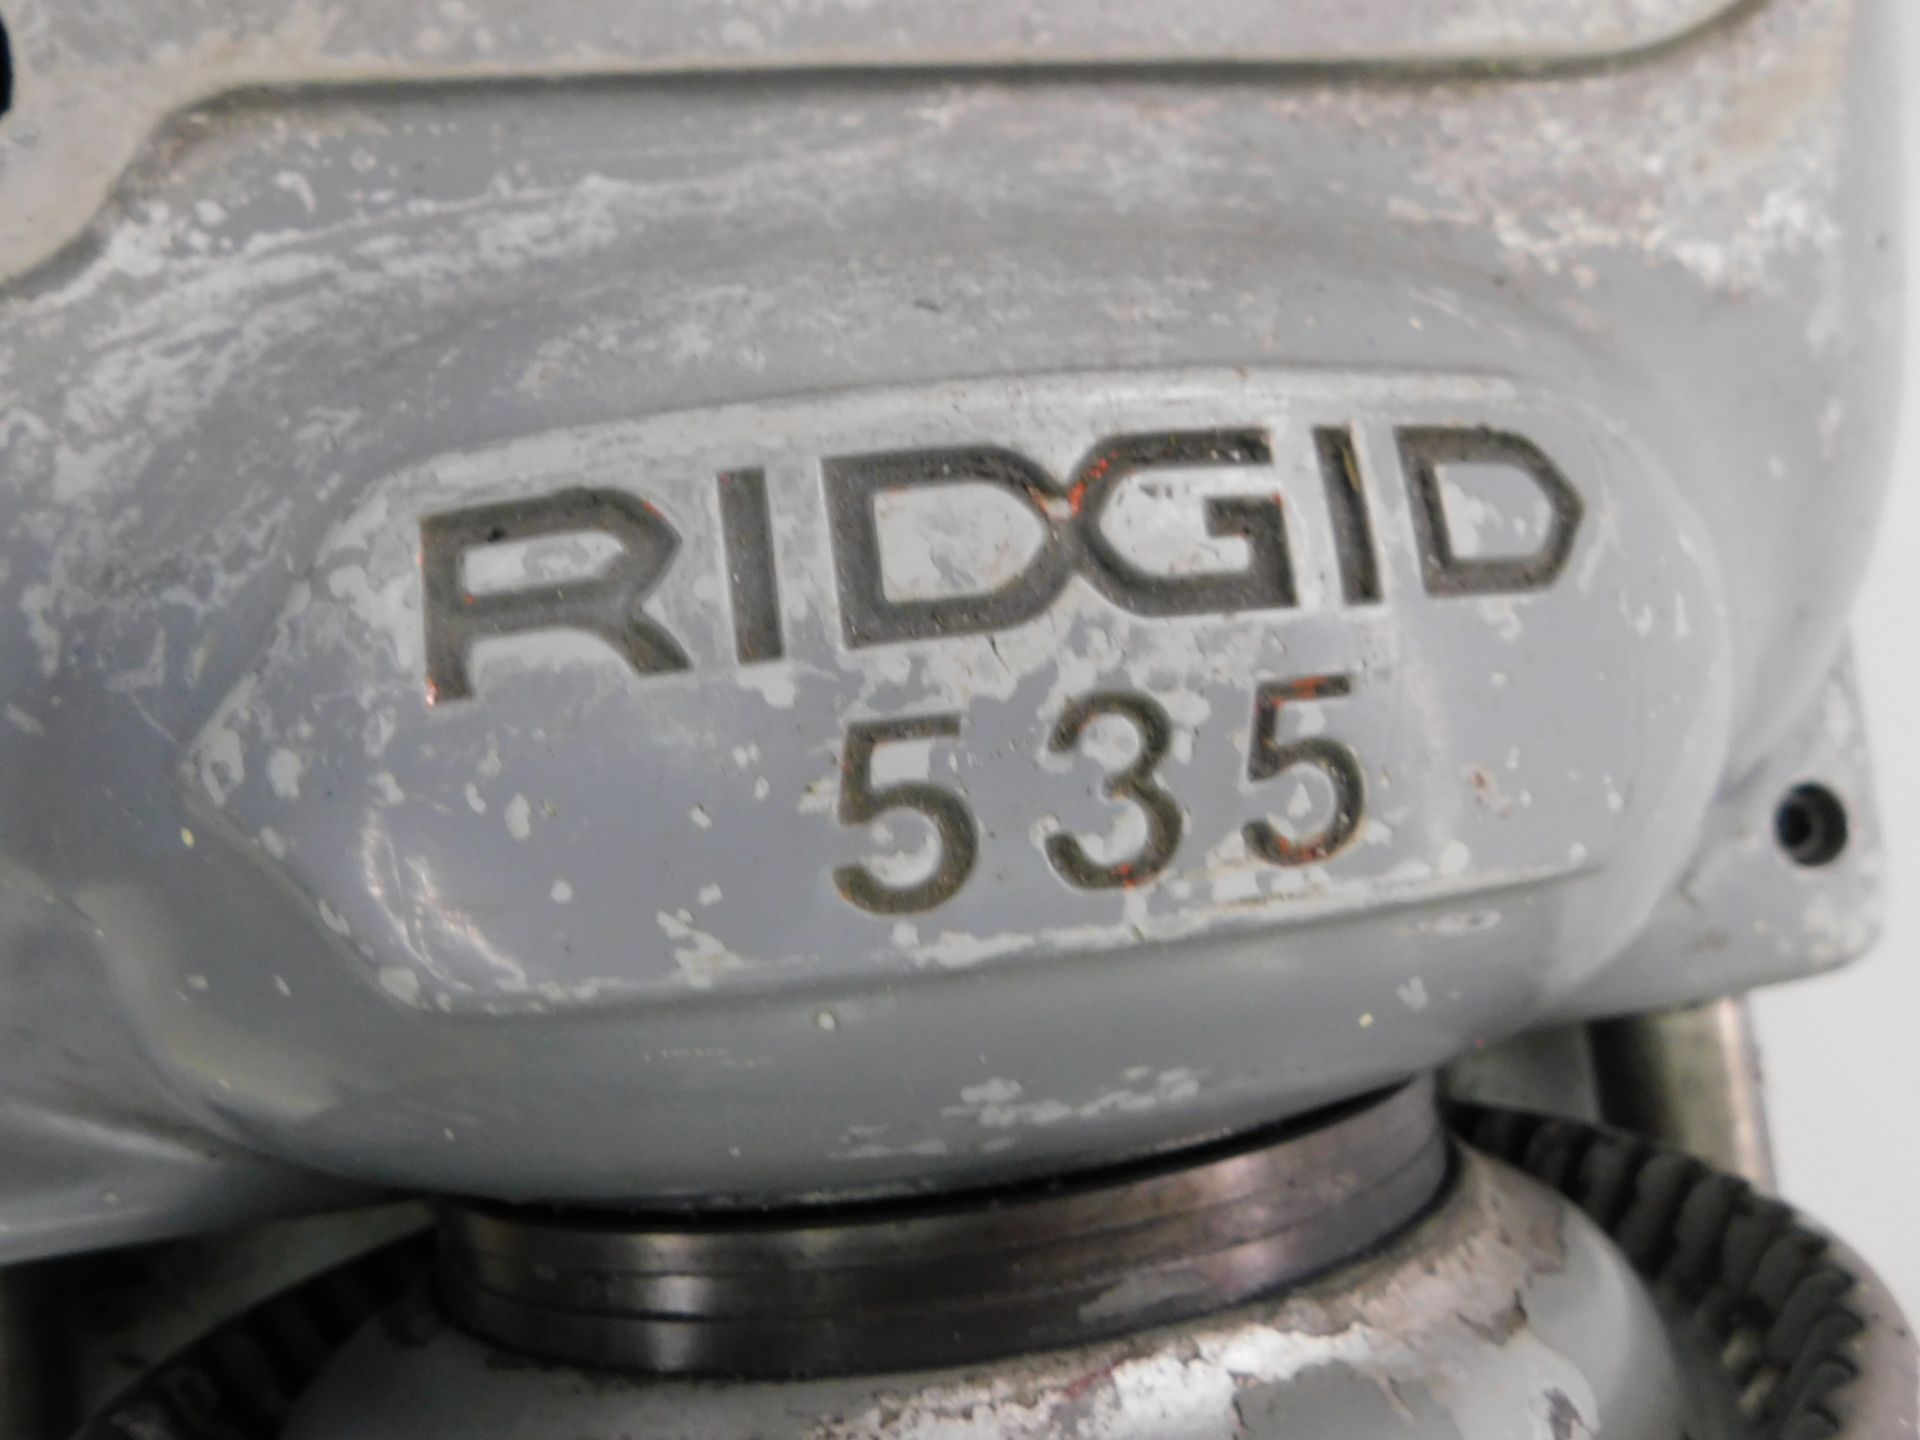 Ridgid Model 535 Pipe Threader, SN EC0 3267, with Die Head, Pipe Cut-Off, Reamer, and Foot Pedal - Image 8 of 12